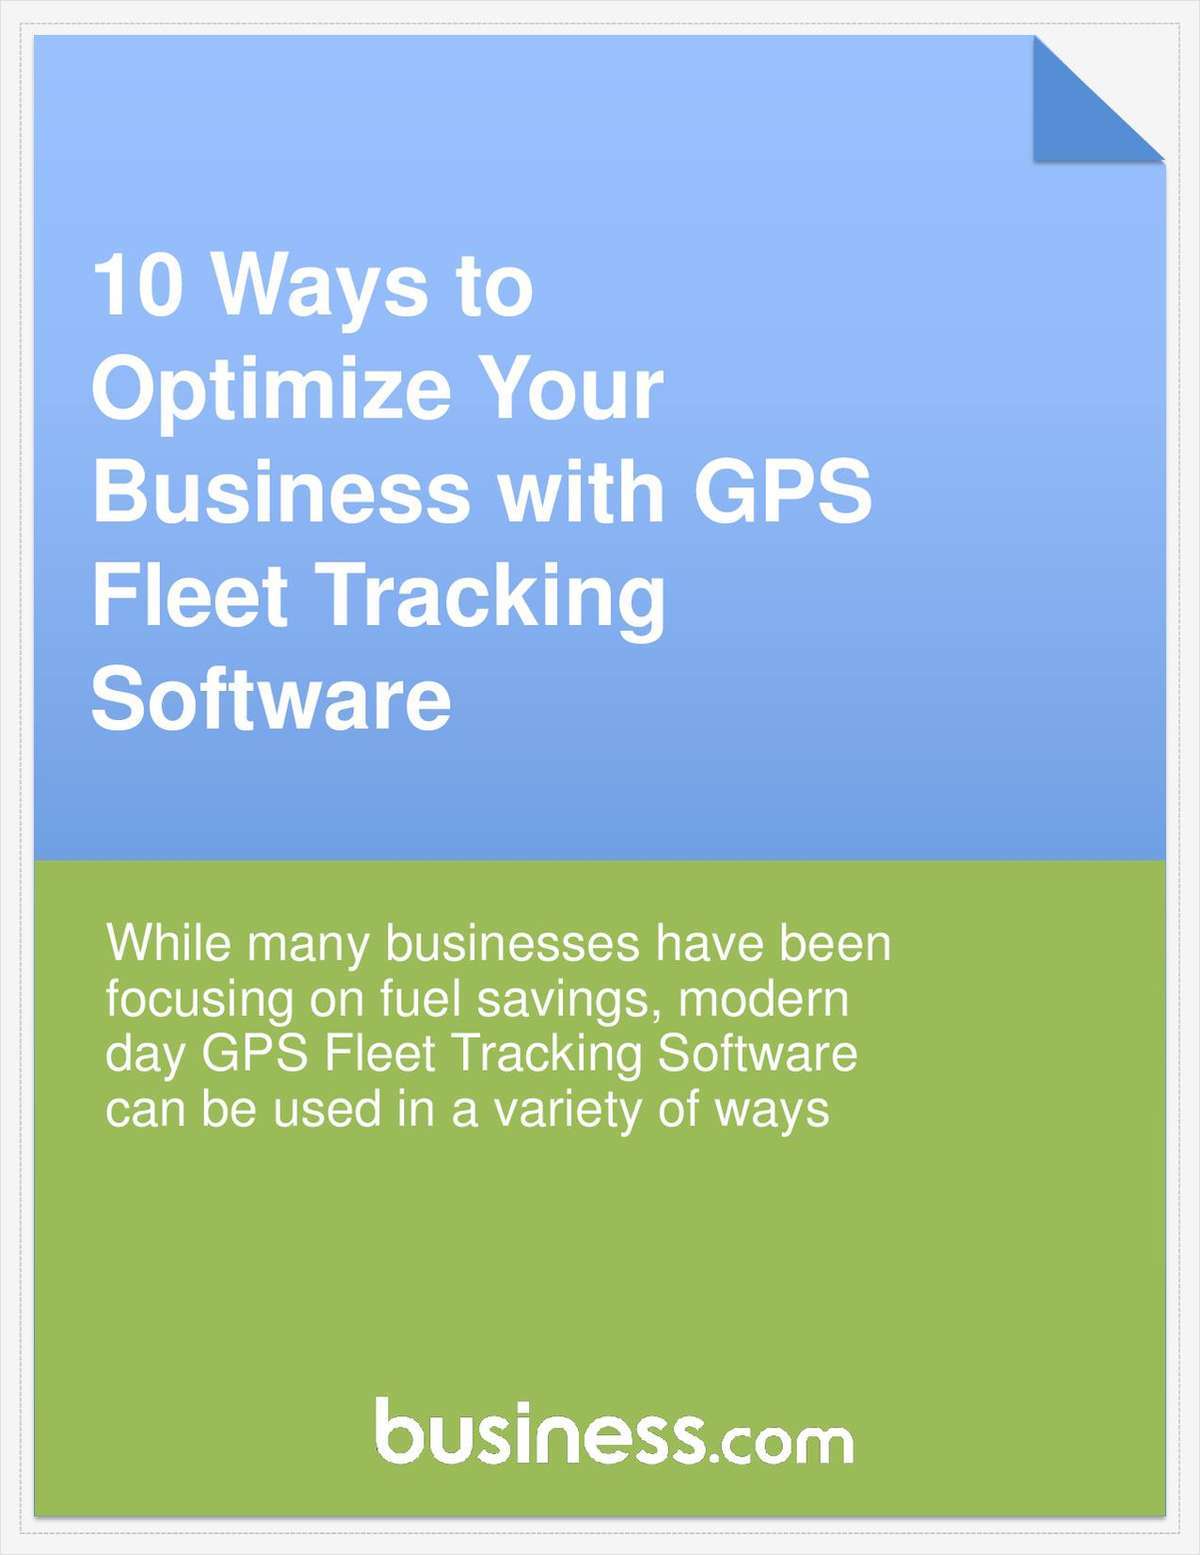 10 Ways to Optimize Your Business with GPS Fleet Tracking Software